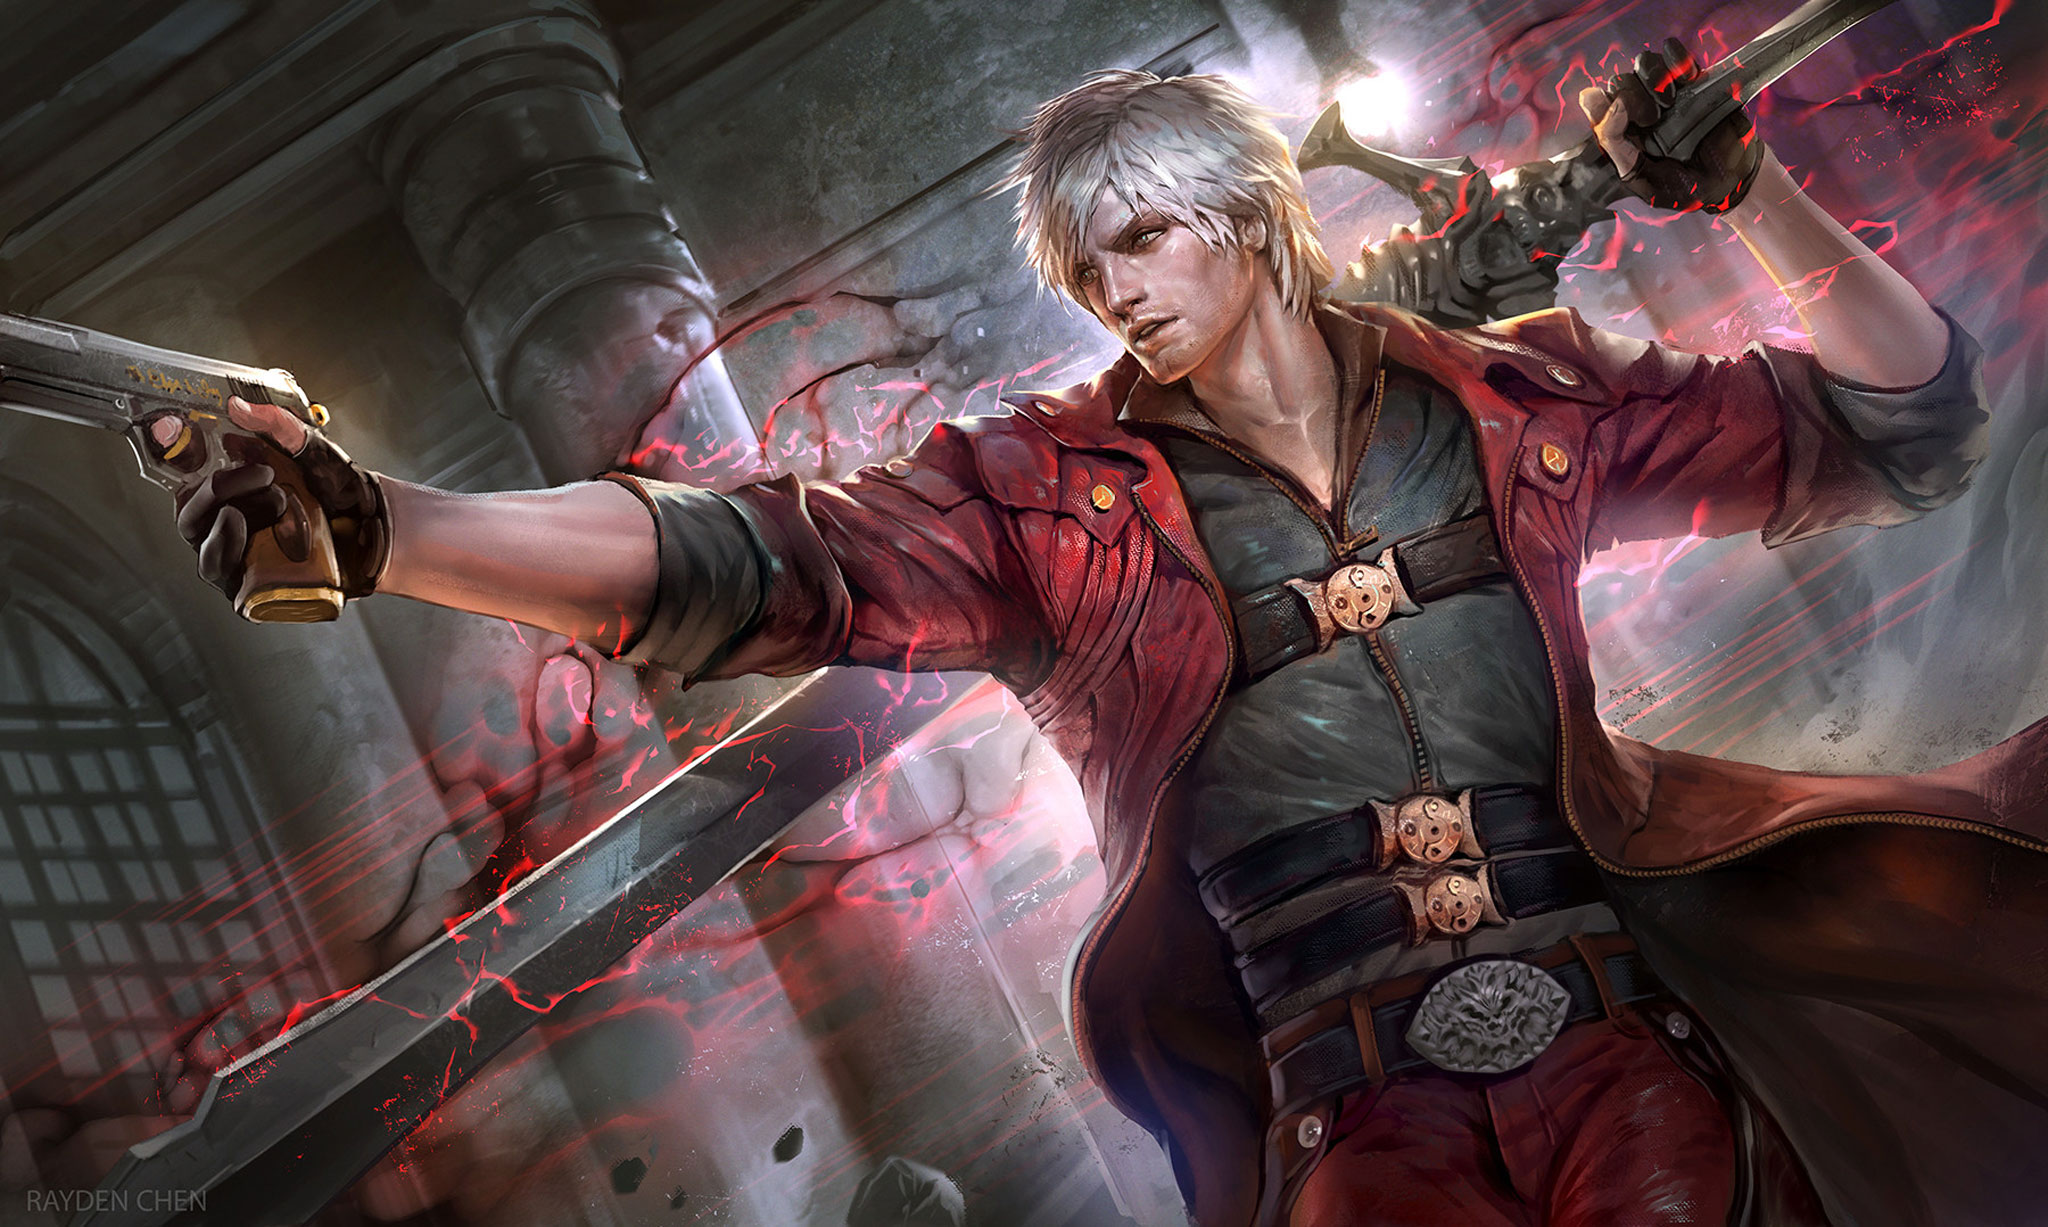 Devil may cry game. Данте DMC. Dante Devil May Cry. Devil my Cry 4 Данте. Данте Devil May Cry 5.